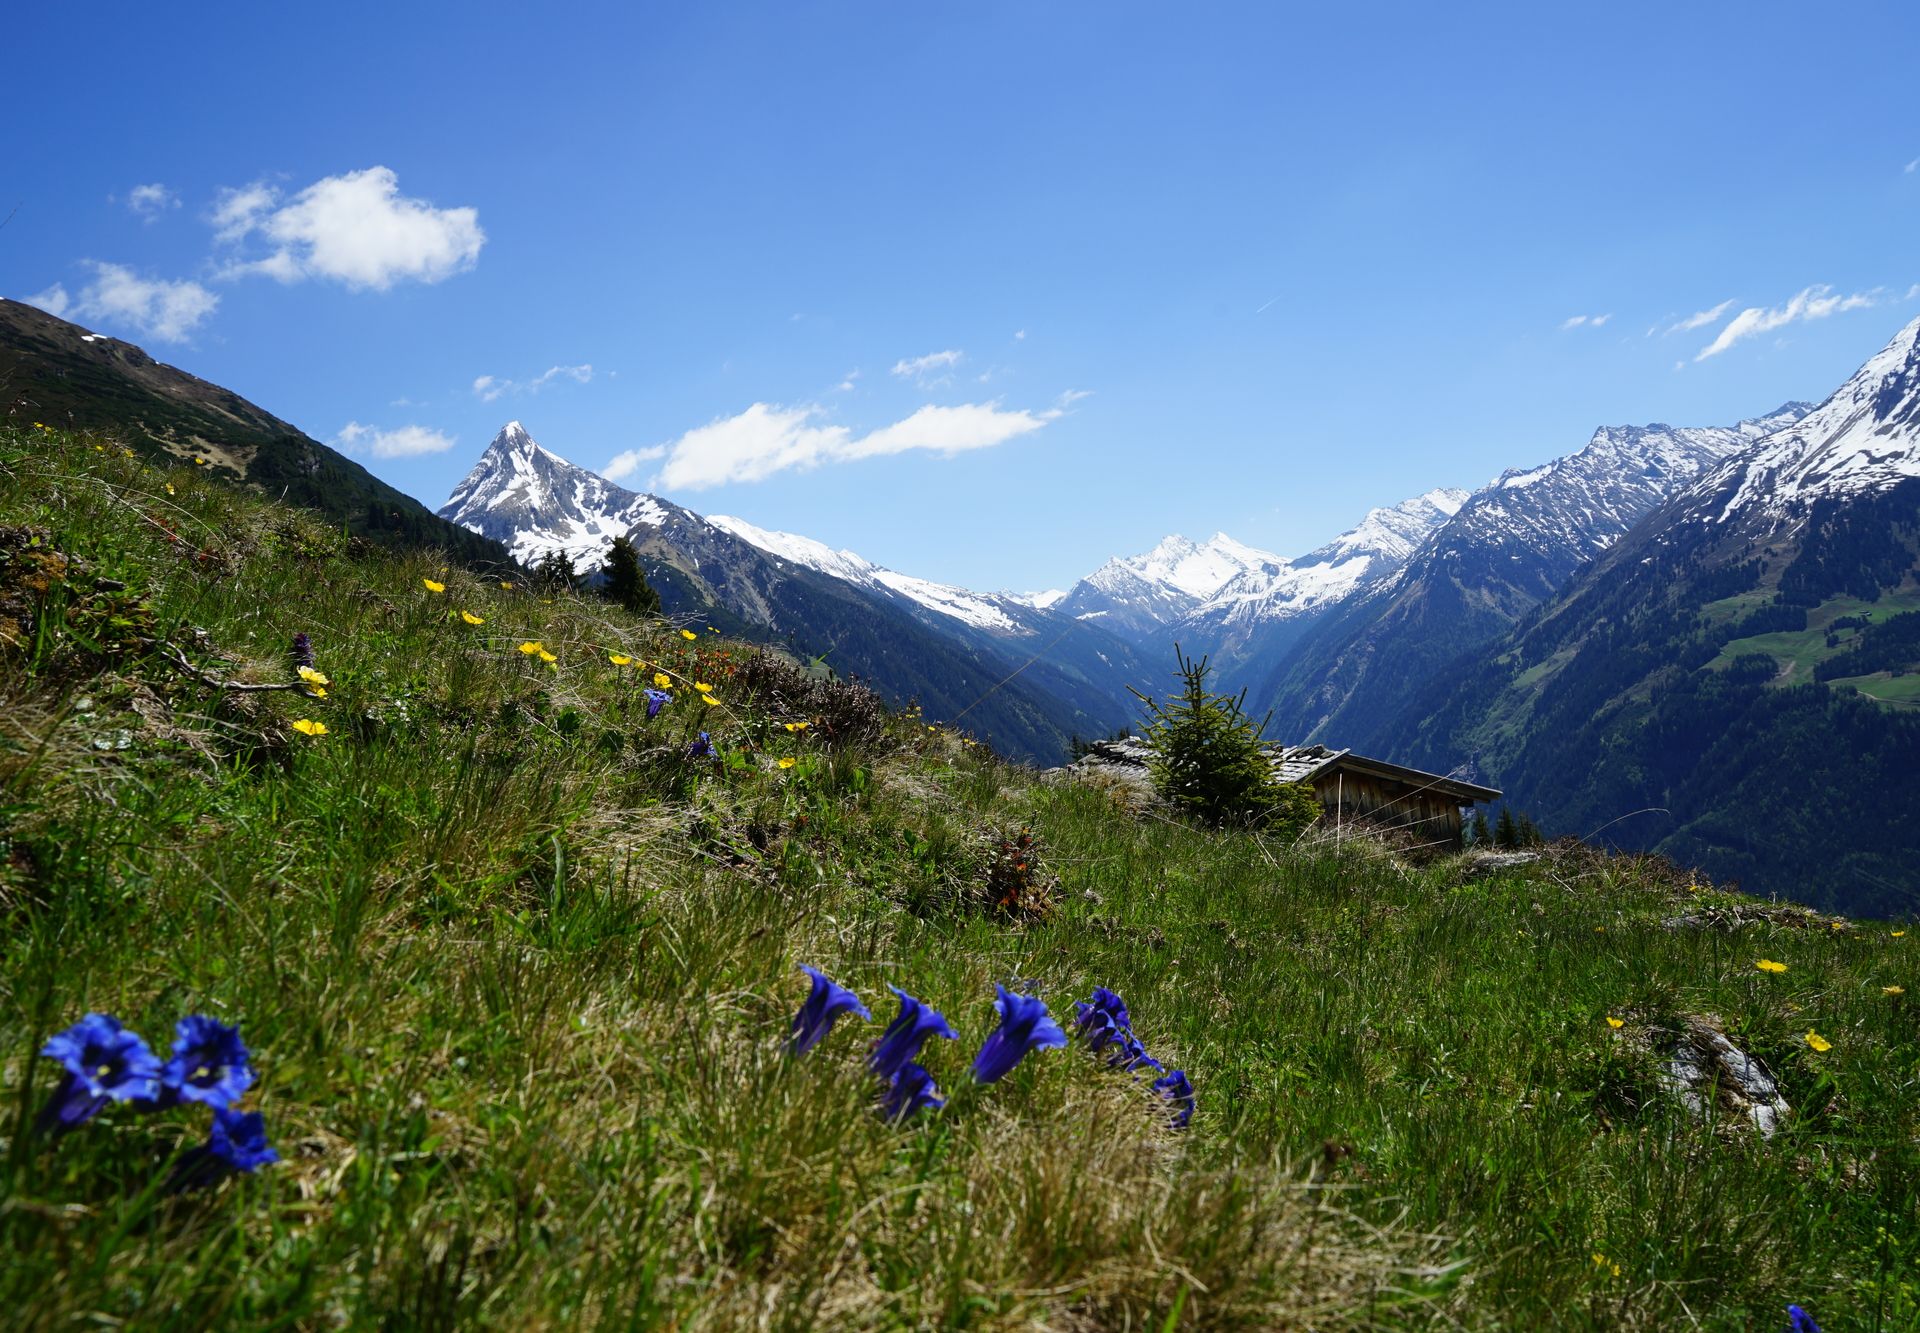  Summer landscape in the high mountain nature park Zillertal Alps